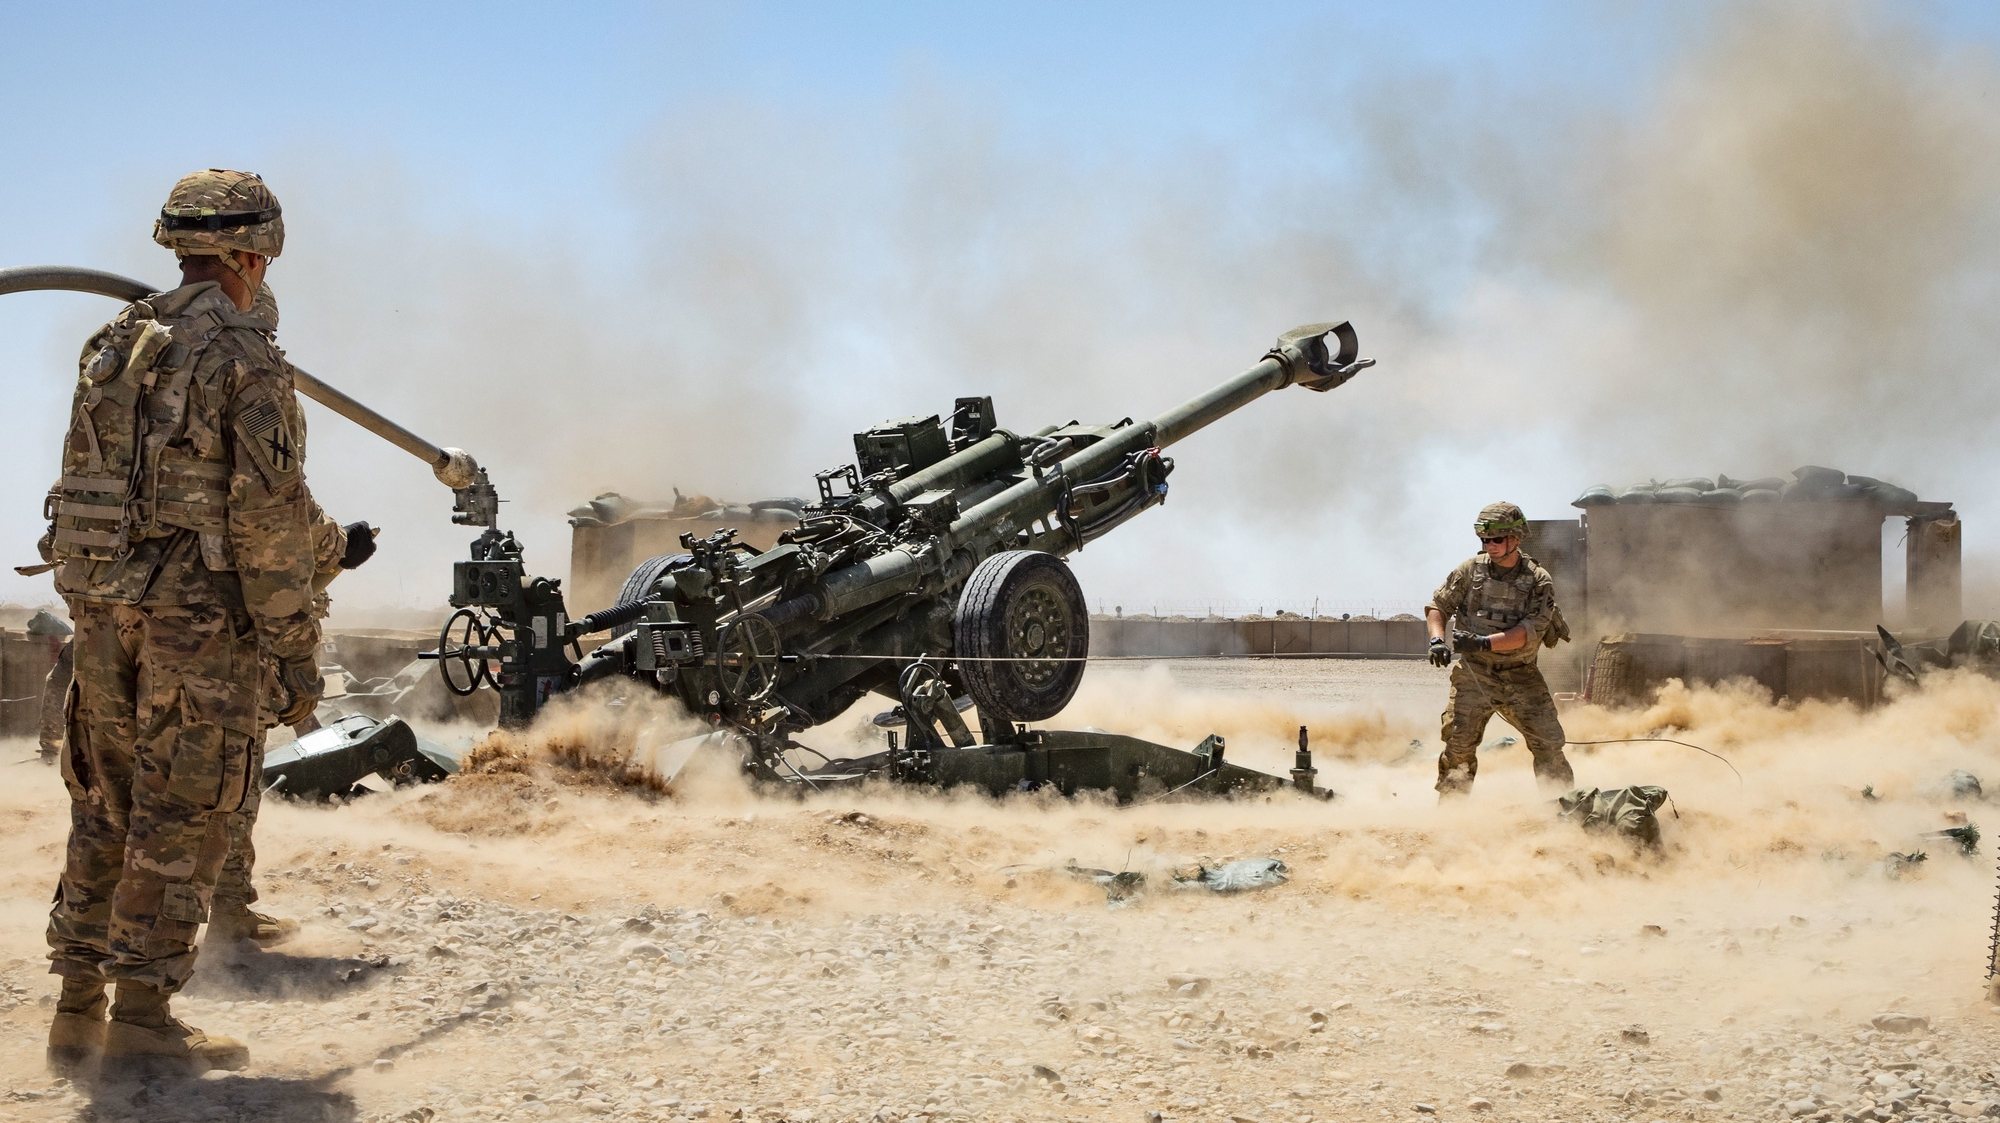 epa07832227 A handout photo made available by the US Army shows Soldiers from the 1-118th Field Artillery Regiment of the 48th Infantry Brigade Combat Team firing an M777 Howitzer during a fire mission in Helmand Province, southern Afghanistan, 10 June 2019 (issued 10 September 2019). Media reports quoting US officials state that the US military is likely to ramp up its operations in Afghanistan following Washington&#039;s suspension of peace talks with the Taliban on 09 September 2019, after the insurgent group kept carrying out high profile attacks in the country, including one that recently killed a US soldier. The Taliban on 10 September 2019, pledged to continue fighting against US forces in Afghanistan after President Trump declared peace talks with the group as &#039;dead&#039;, media added.  EPA/SGT. JORDAN TRENT/US ARMY HANDOUT  HANDOUT EDITORIAL USE ONLY/NO SALES